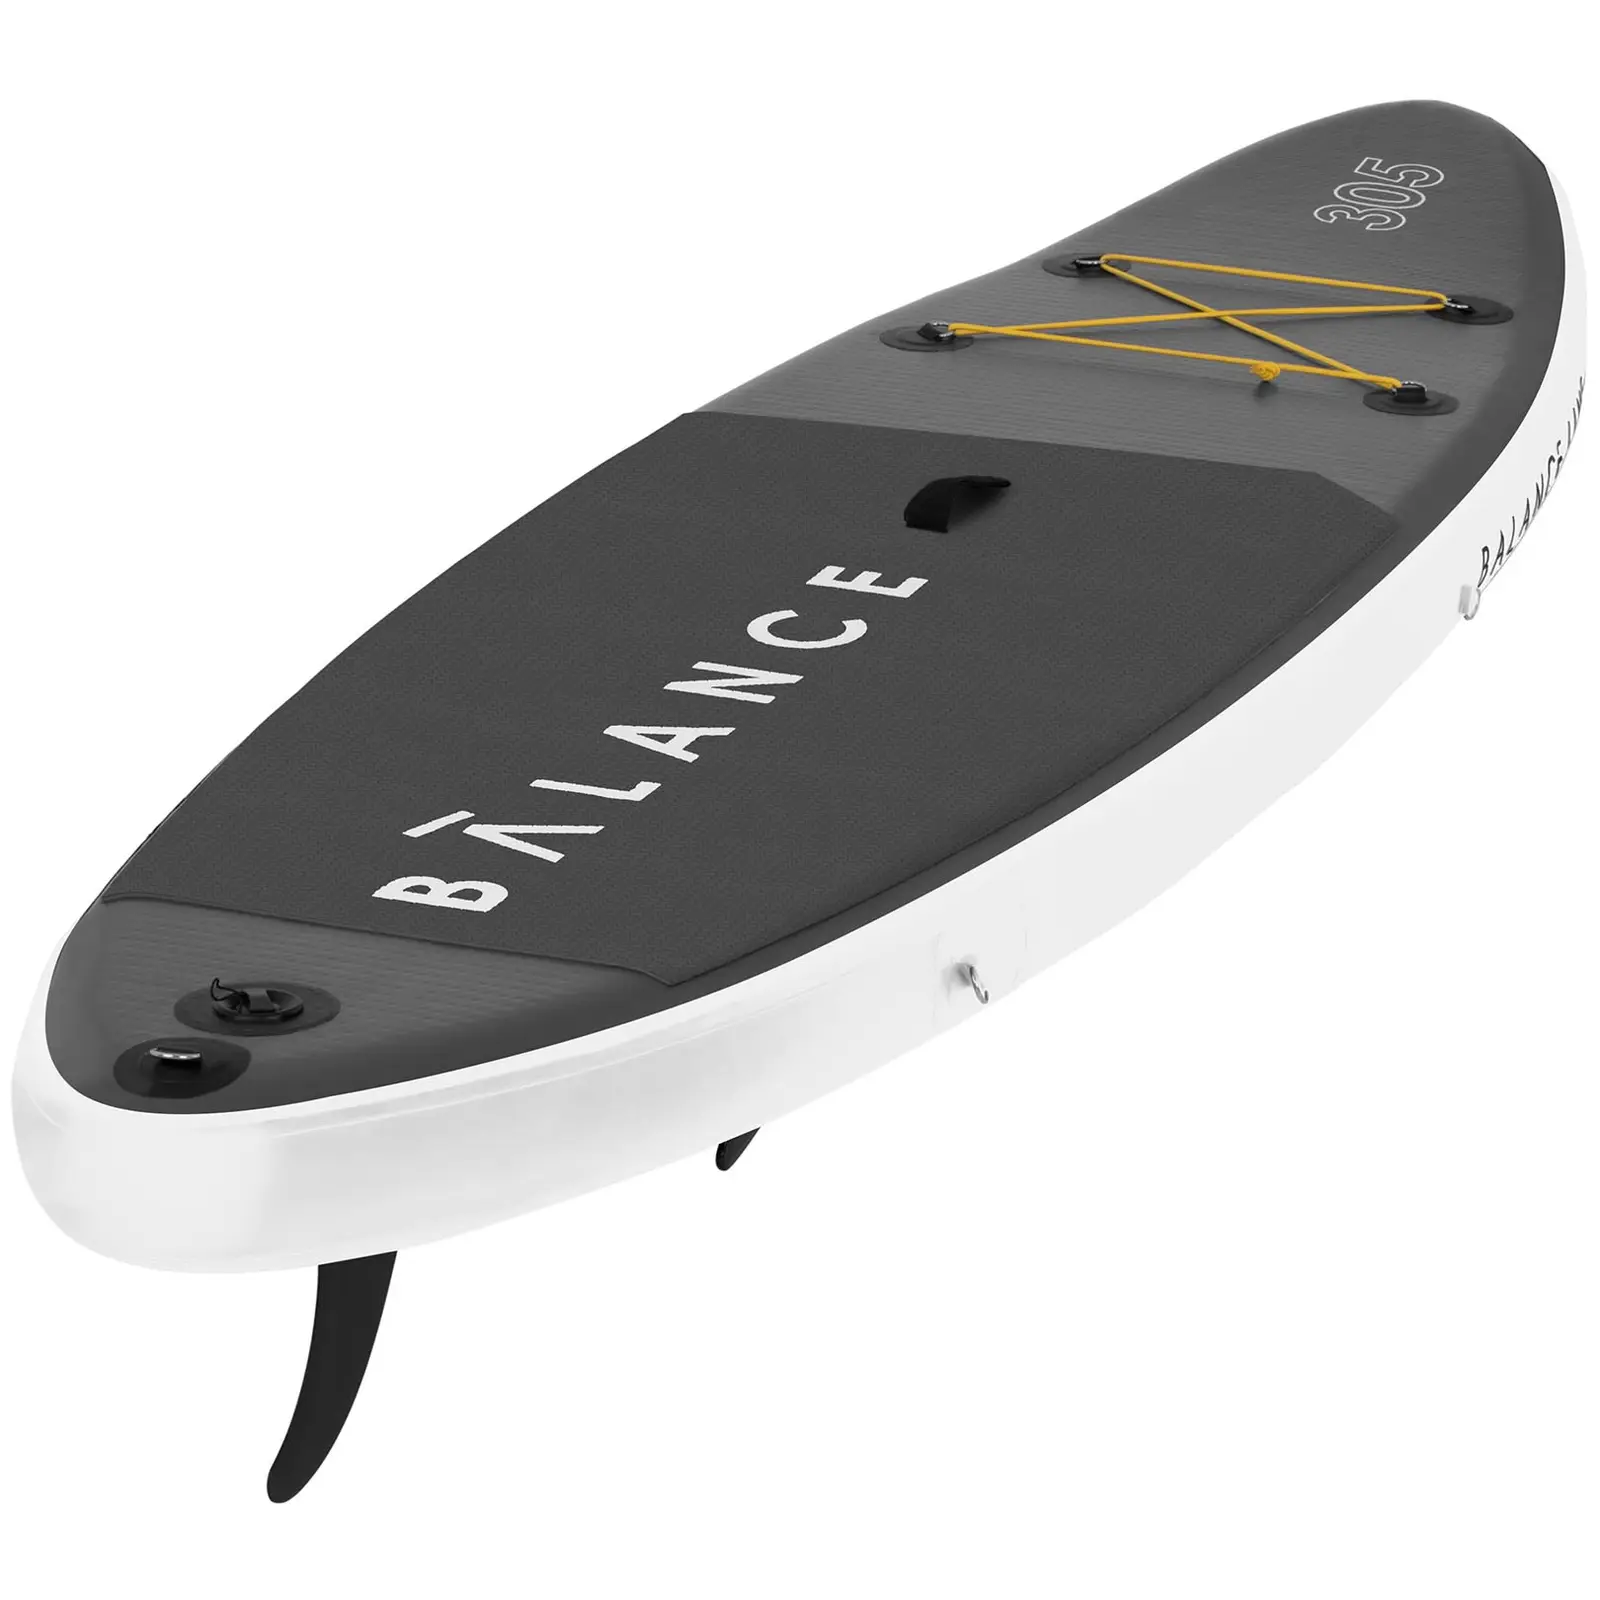 Inflatable SUP Board - 135 kg - 305 x 79 x 15 cm